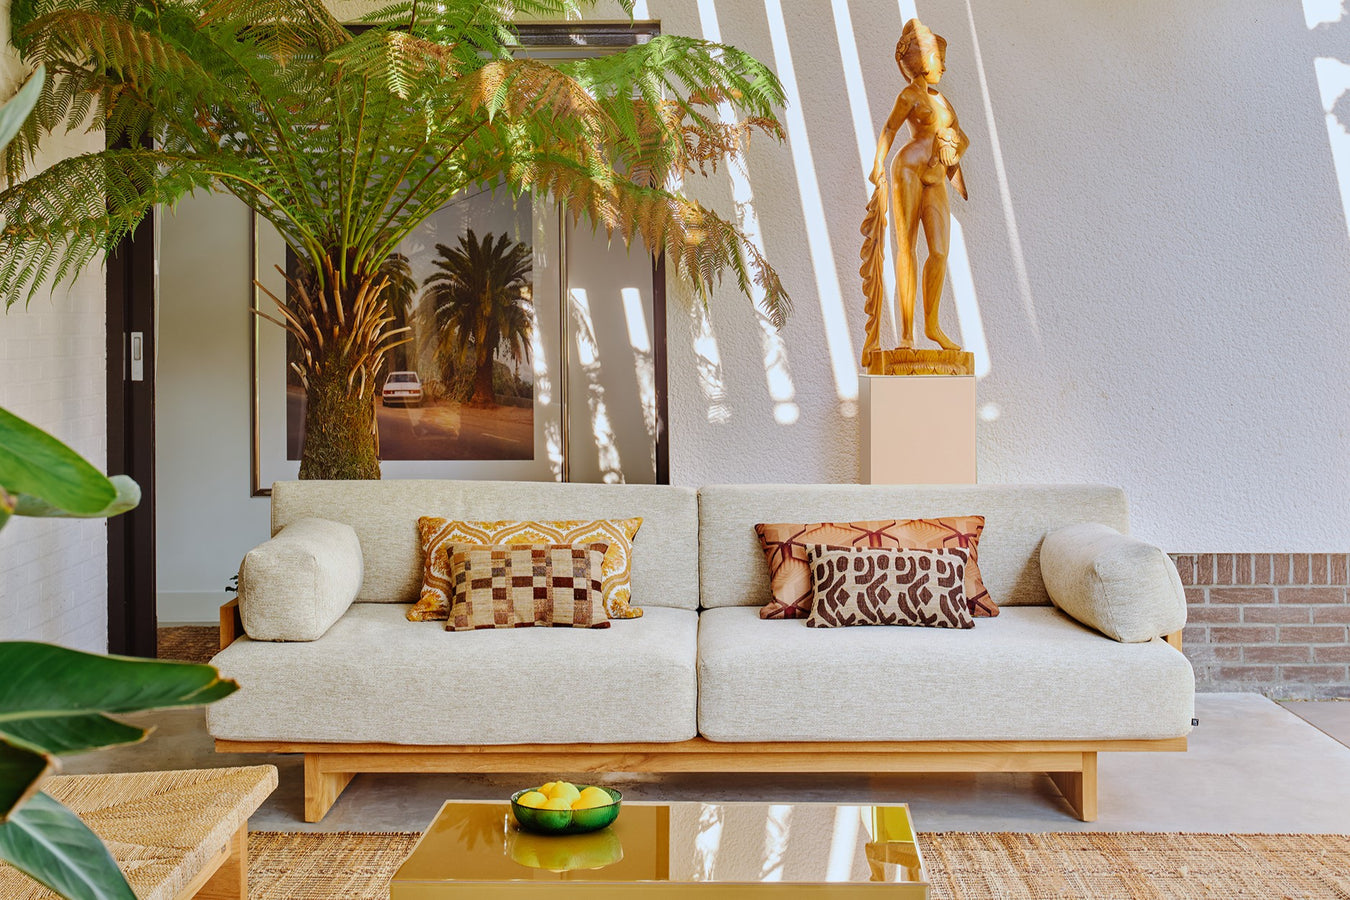 outdoor teak sofa with cream colored cushions, art work and palm tree